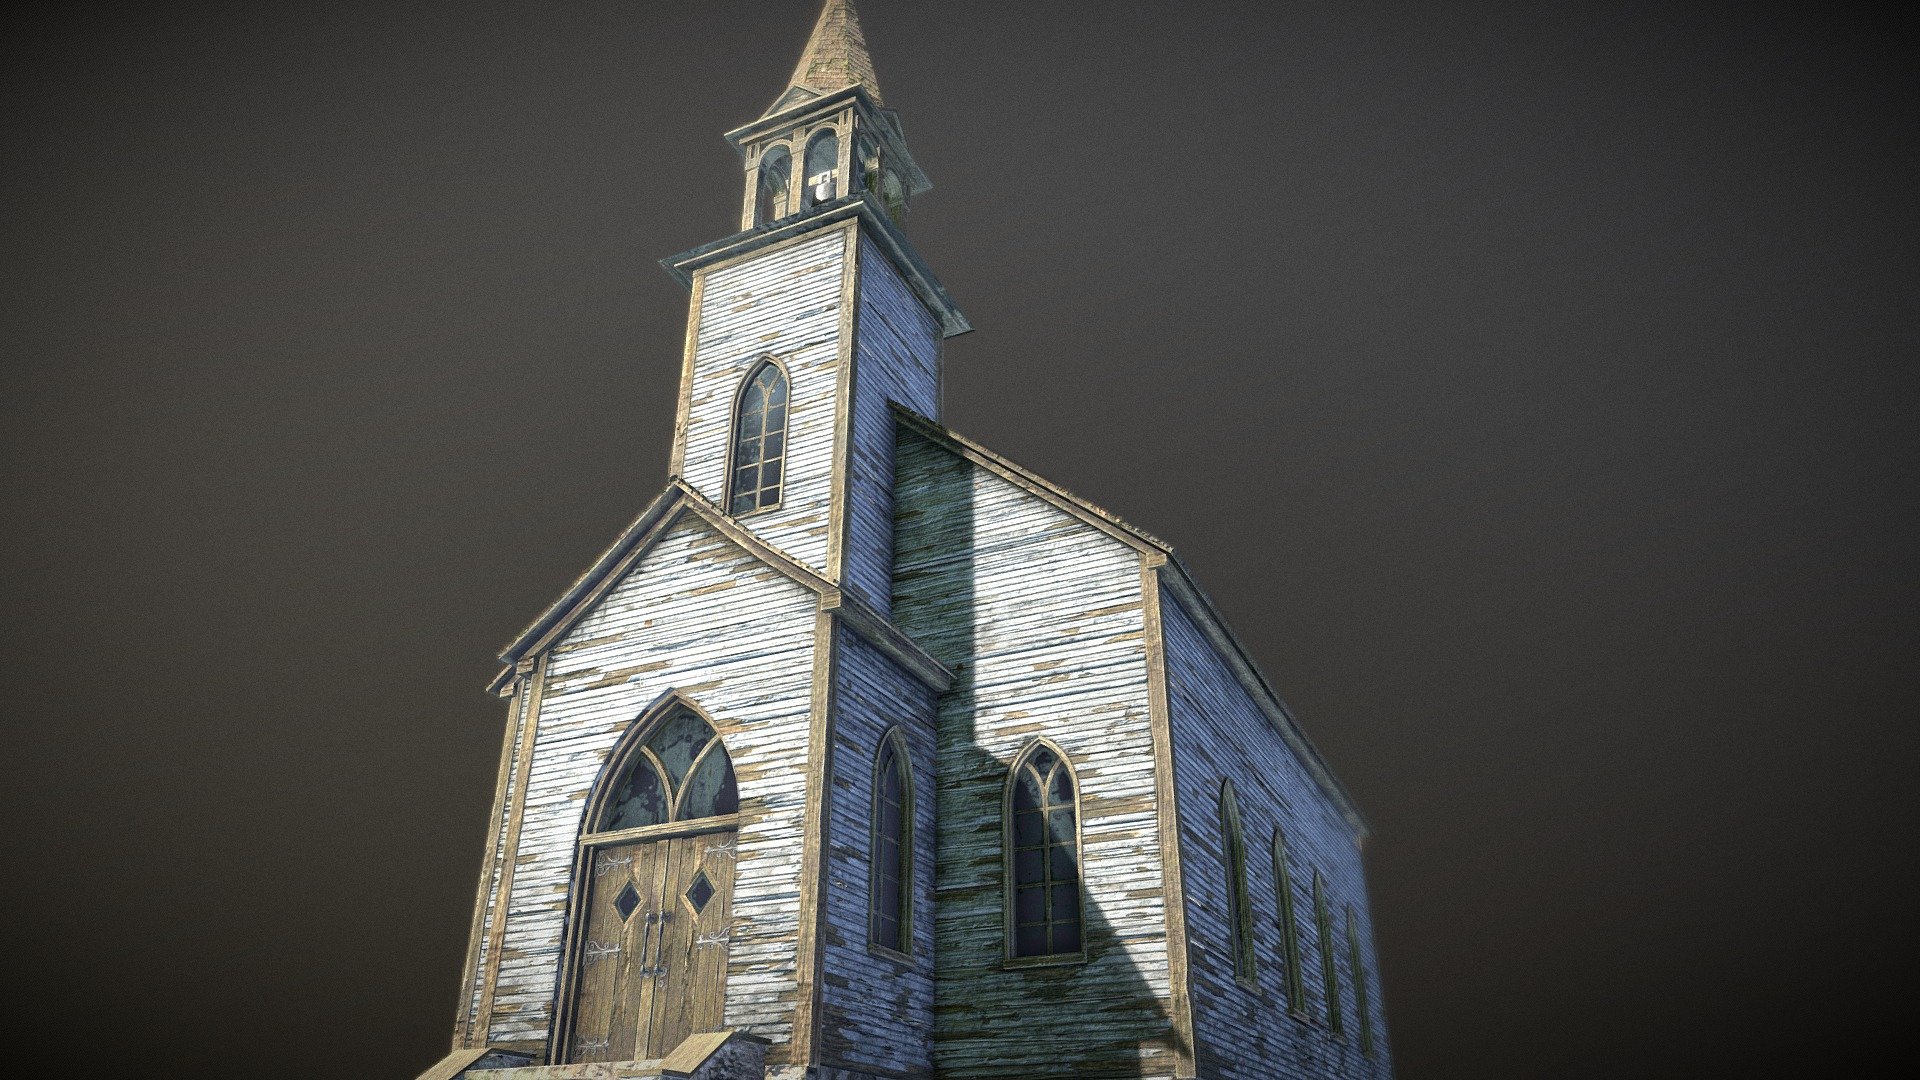 Old north american chapel

1 mesh of 7 UDIM/material of 4K jpg (frontwall / backwall / sidewalls / belltower / foundation / roof / windowsNdoors )

countain a FBX as groupmodel ( 7 pieces) and meshmaps (mainly for ID) in ZIP

Everyplank is a mesh which make them removable to reveal the stoneswall behind if need be 3d model